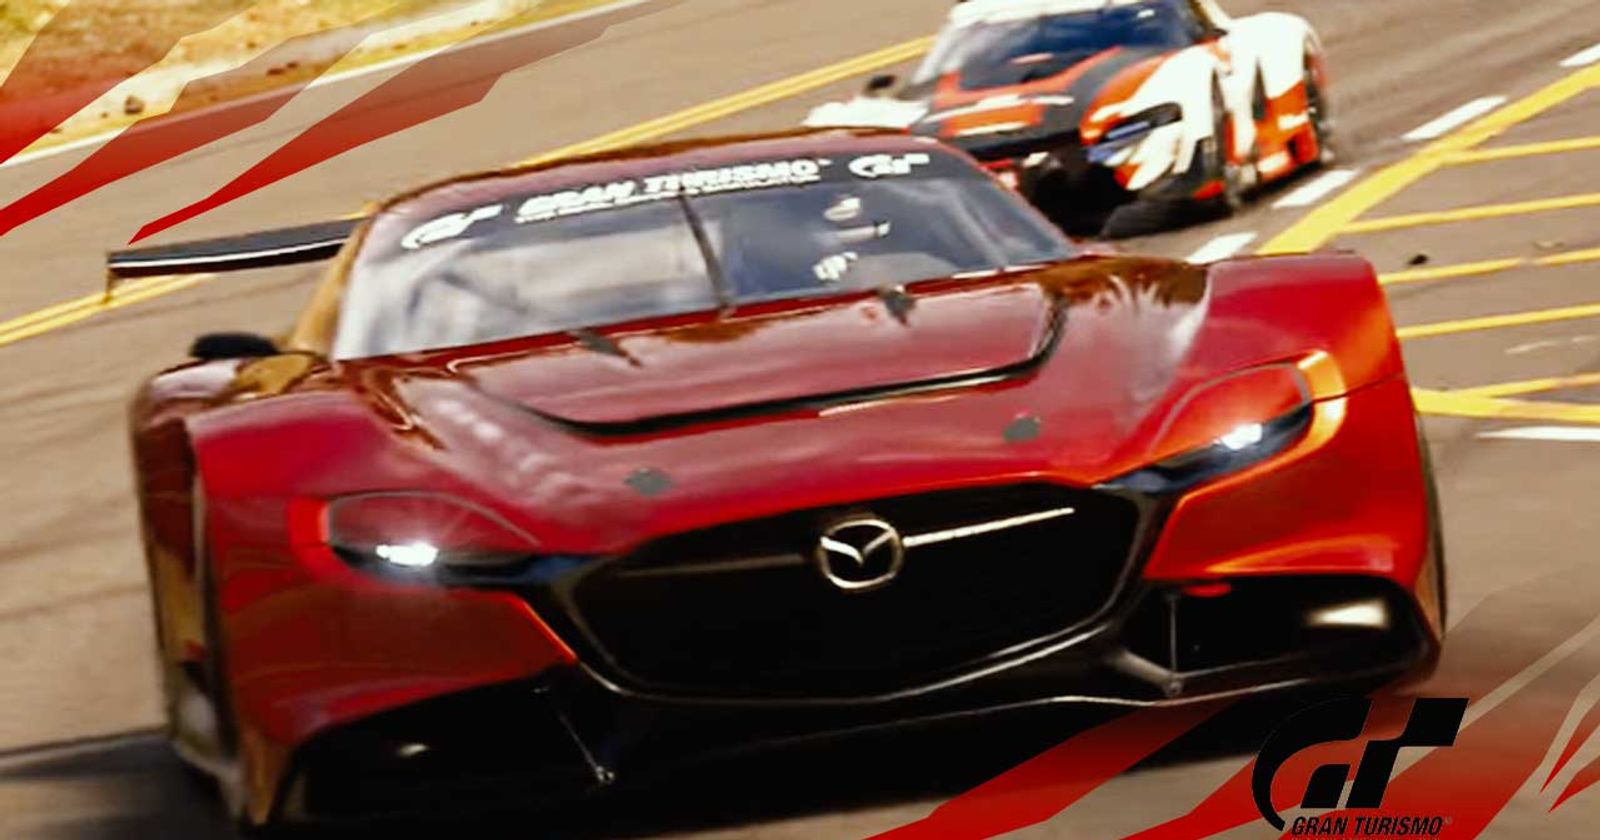 Gran Turismo 7' release date, trailer, pre-order details, and game modes